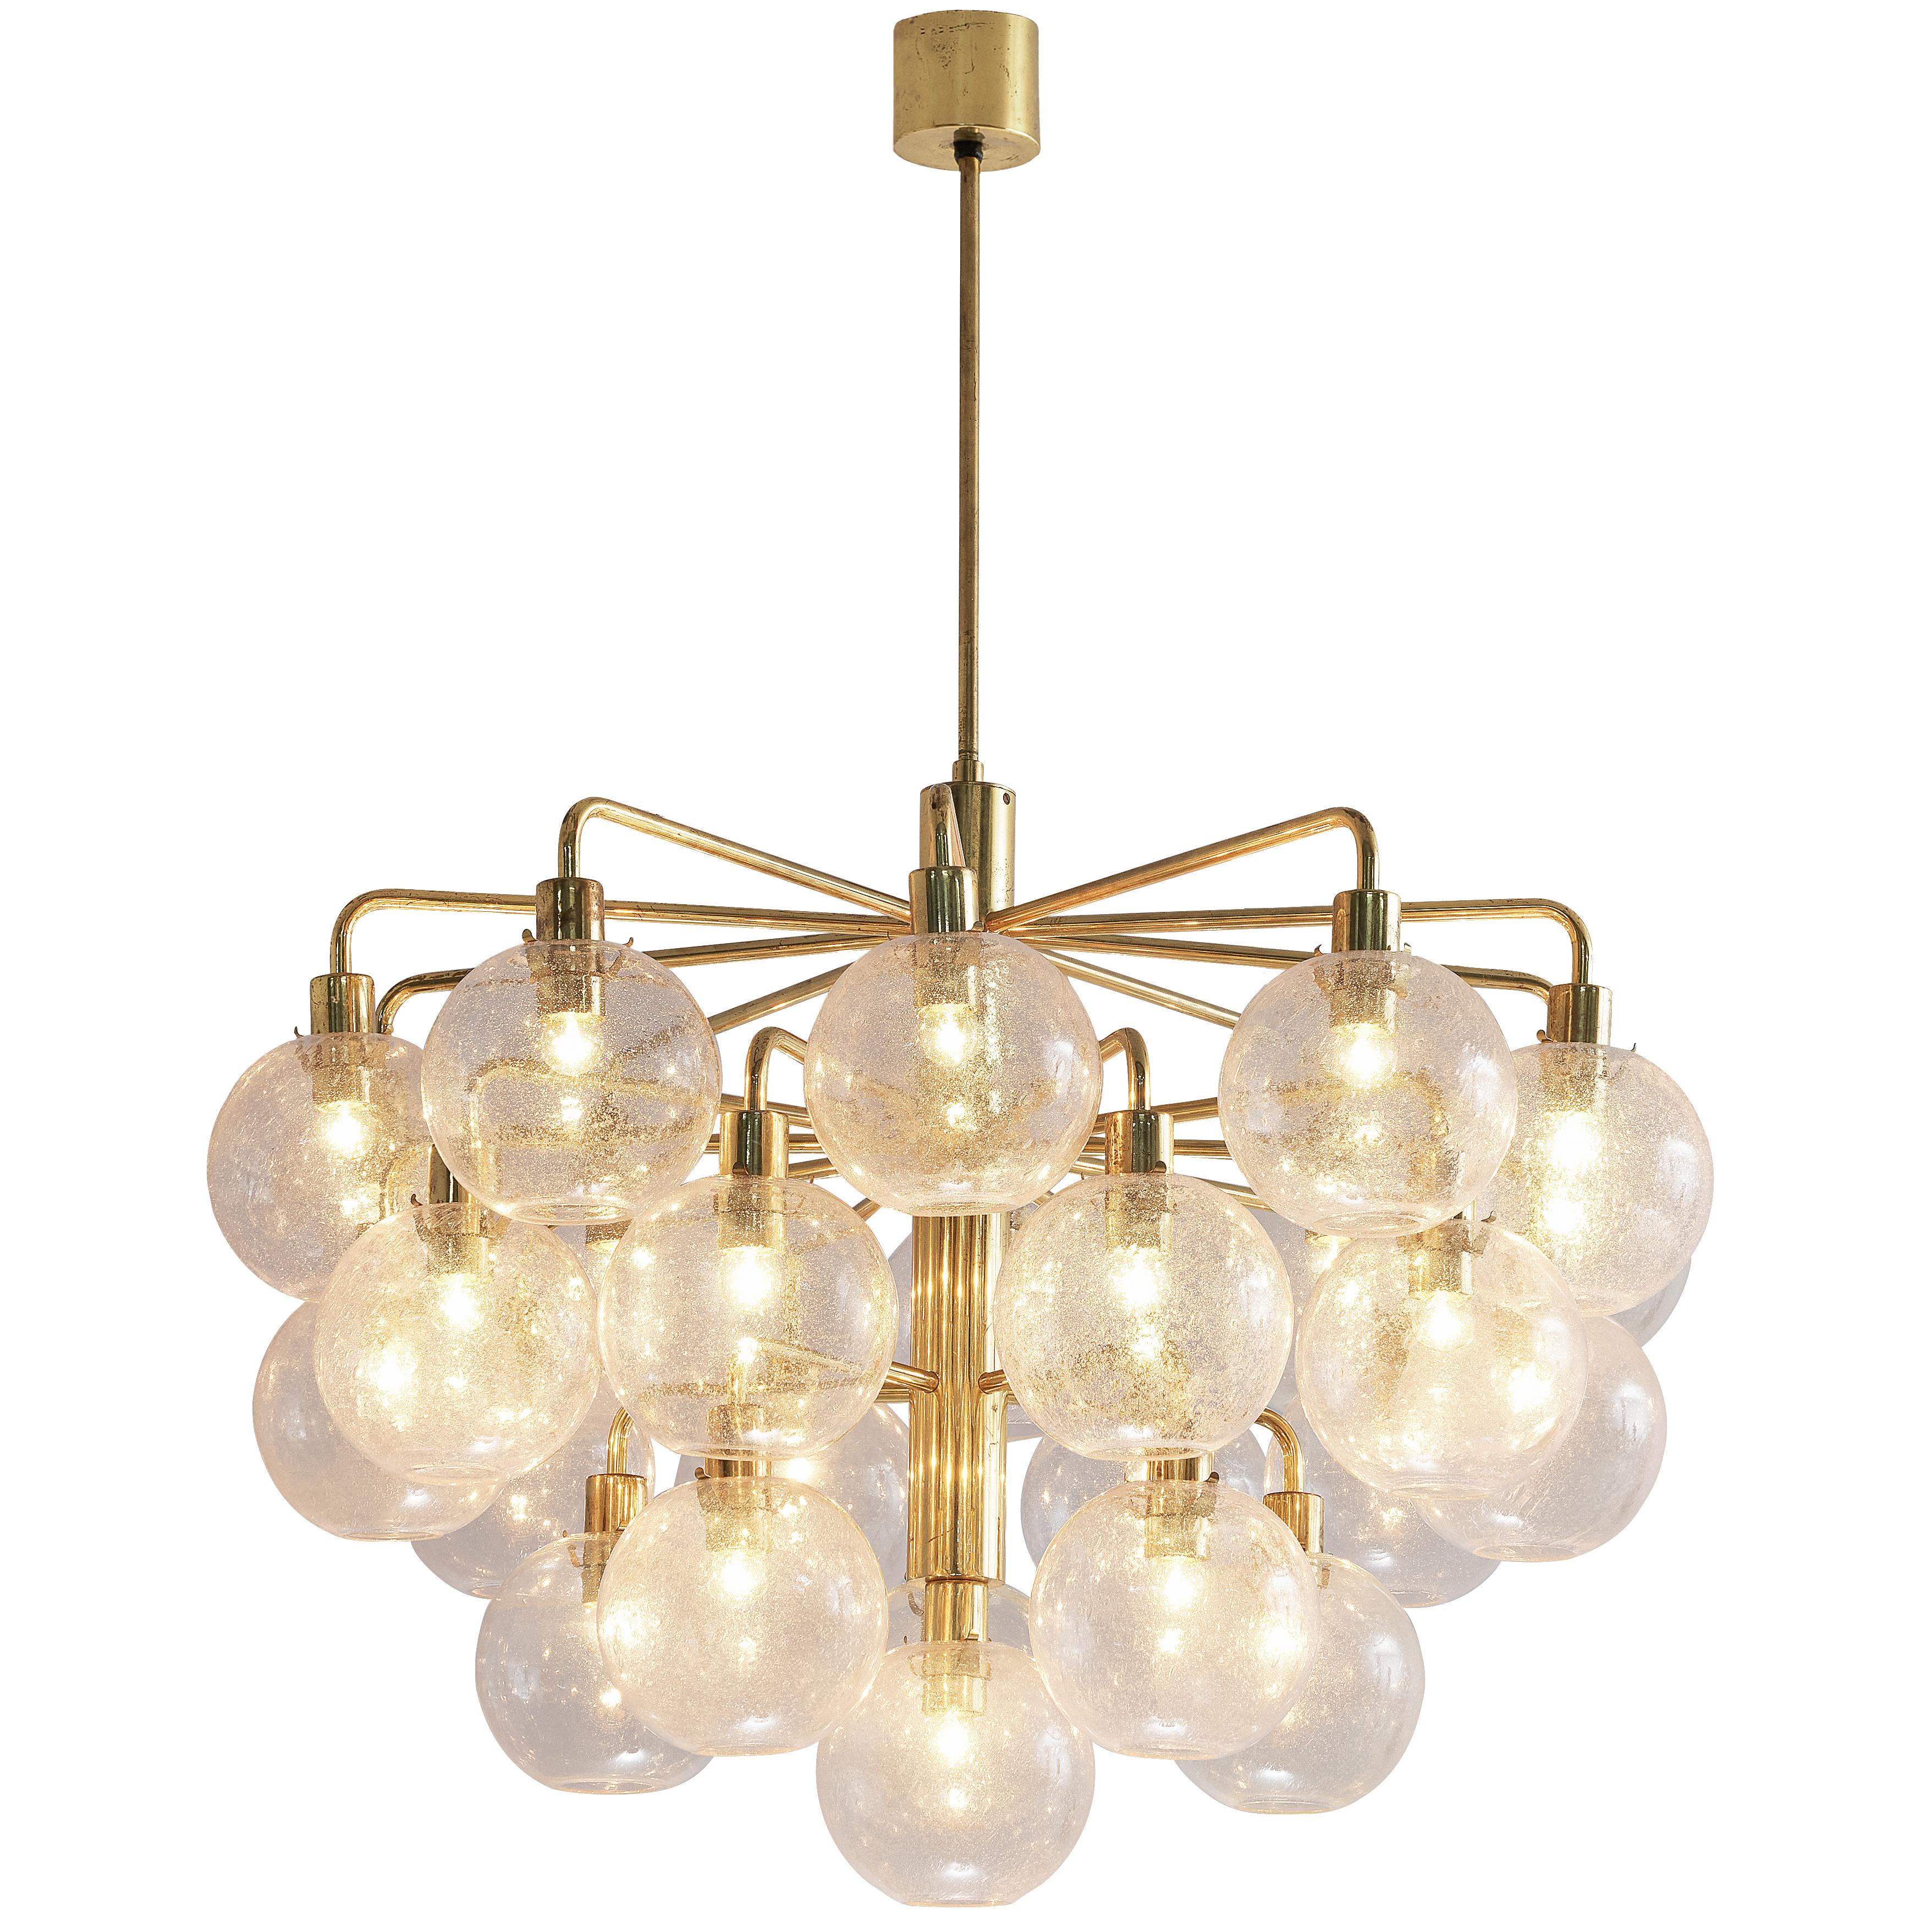 Large Hans-Agne Jakobsson Chandelier with Glass Spheres For Sale